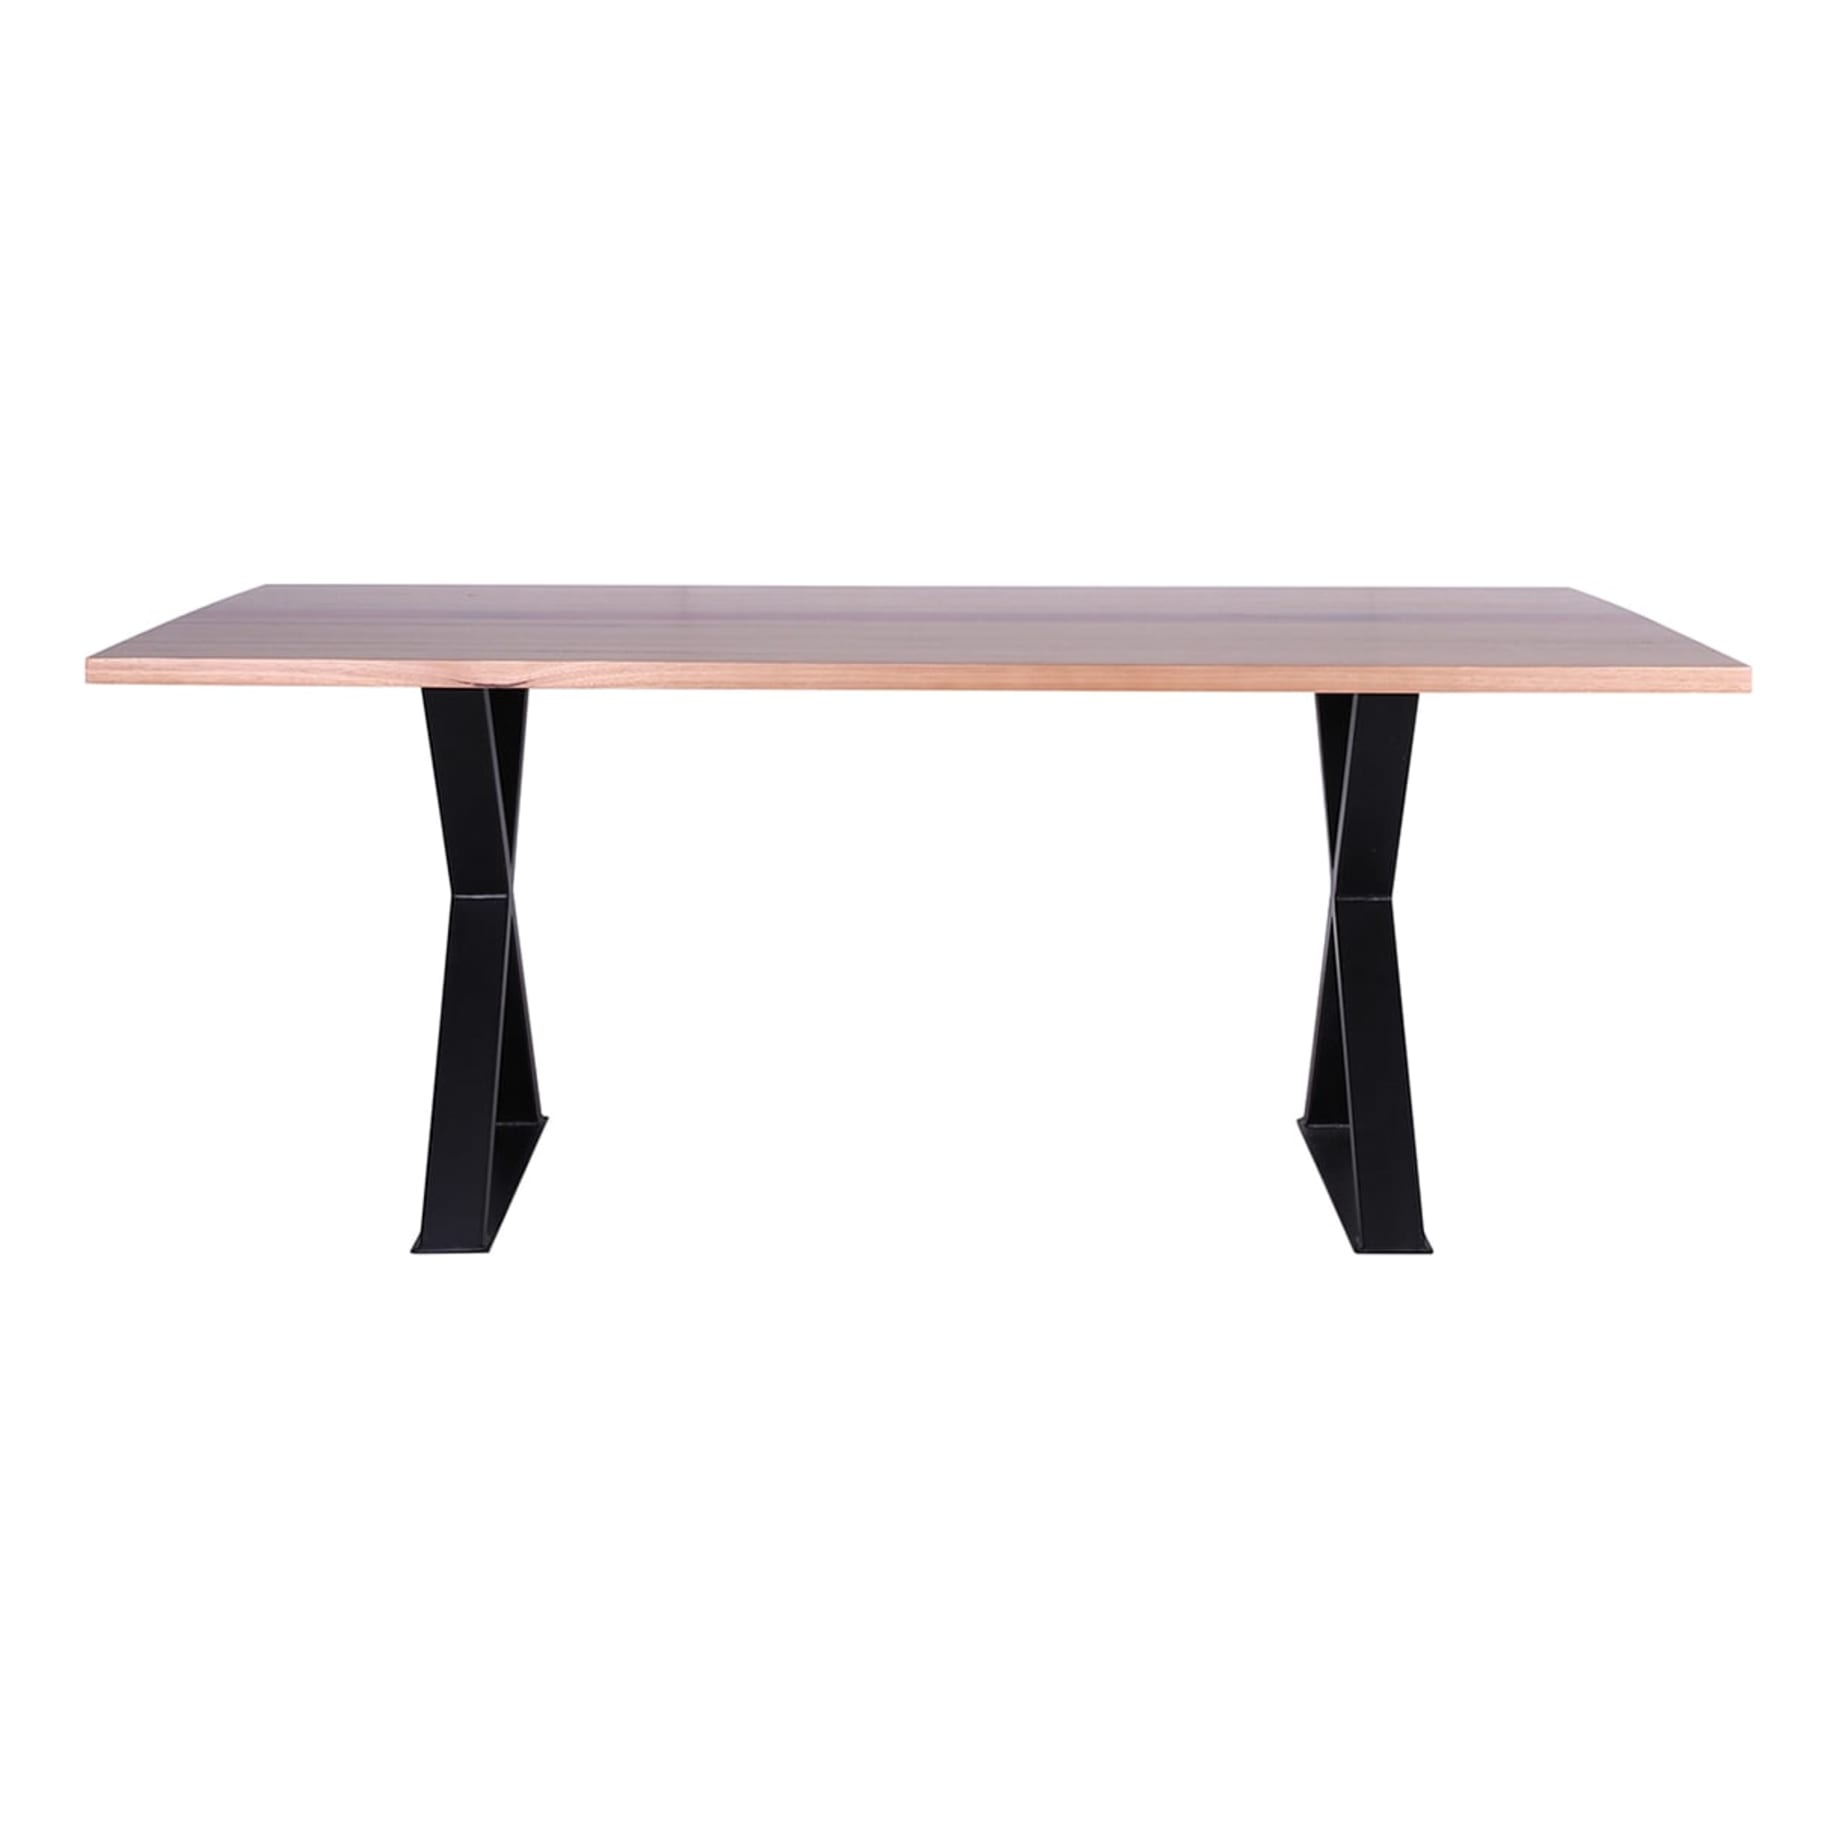 Rawson Dining Table 210cm in Messmate